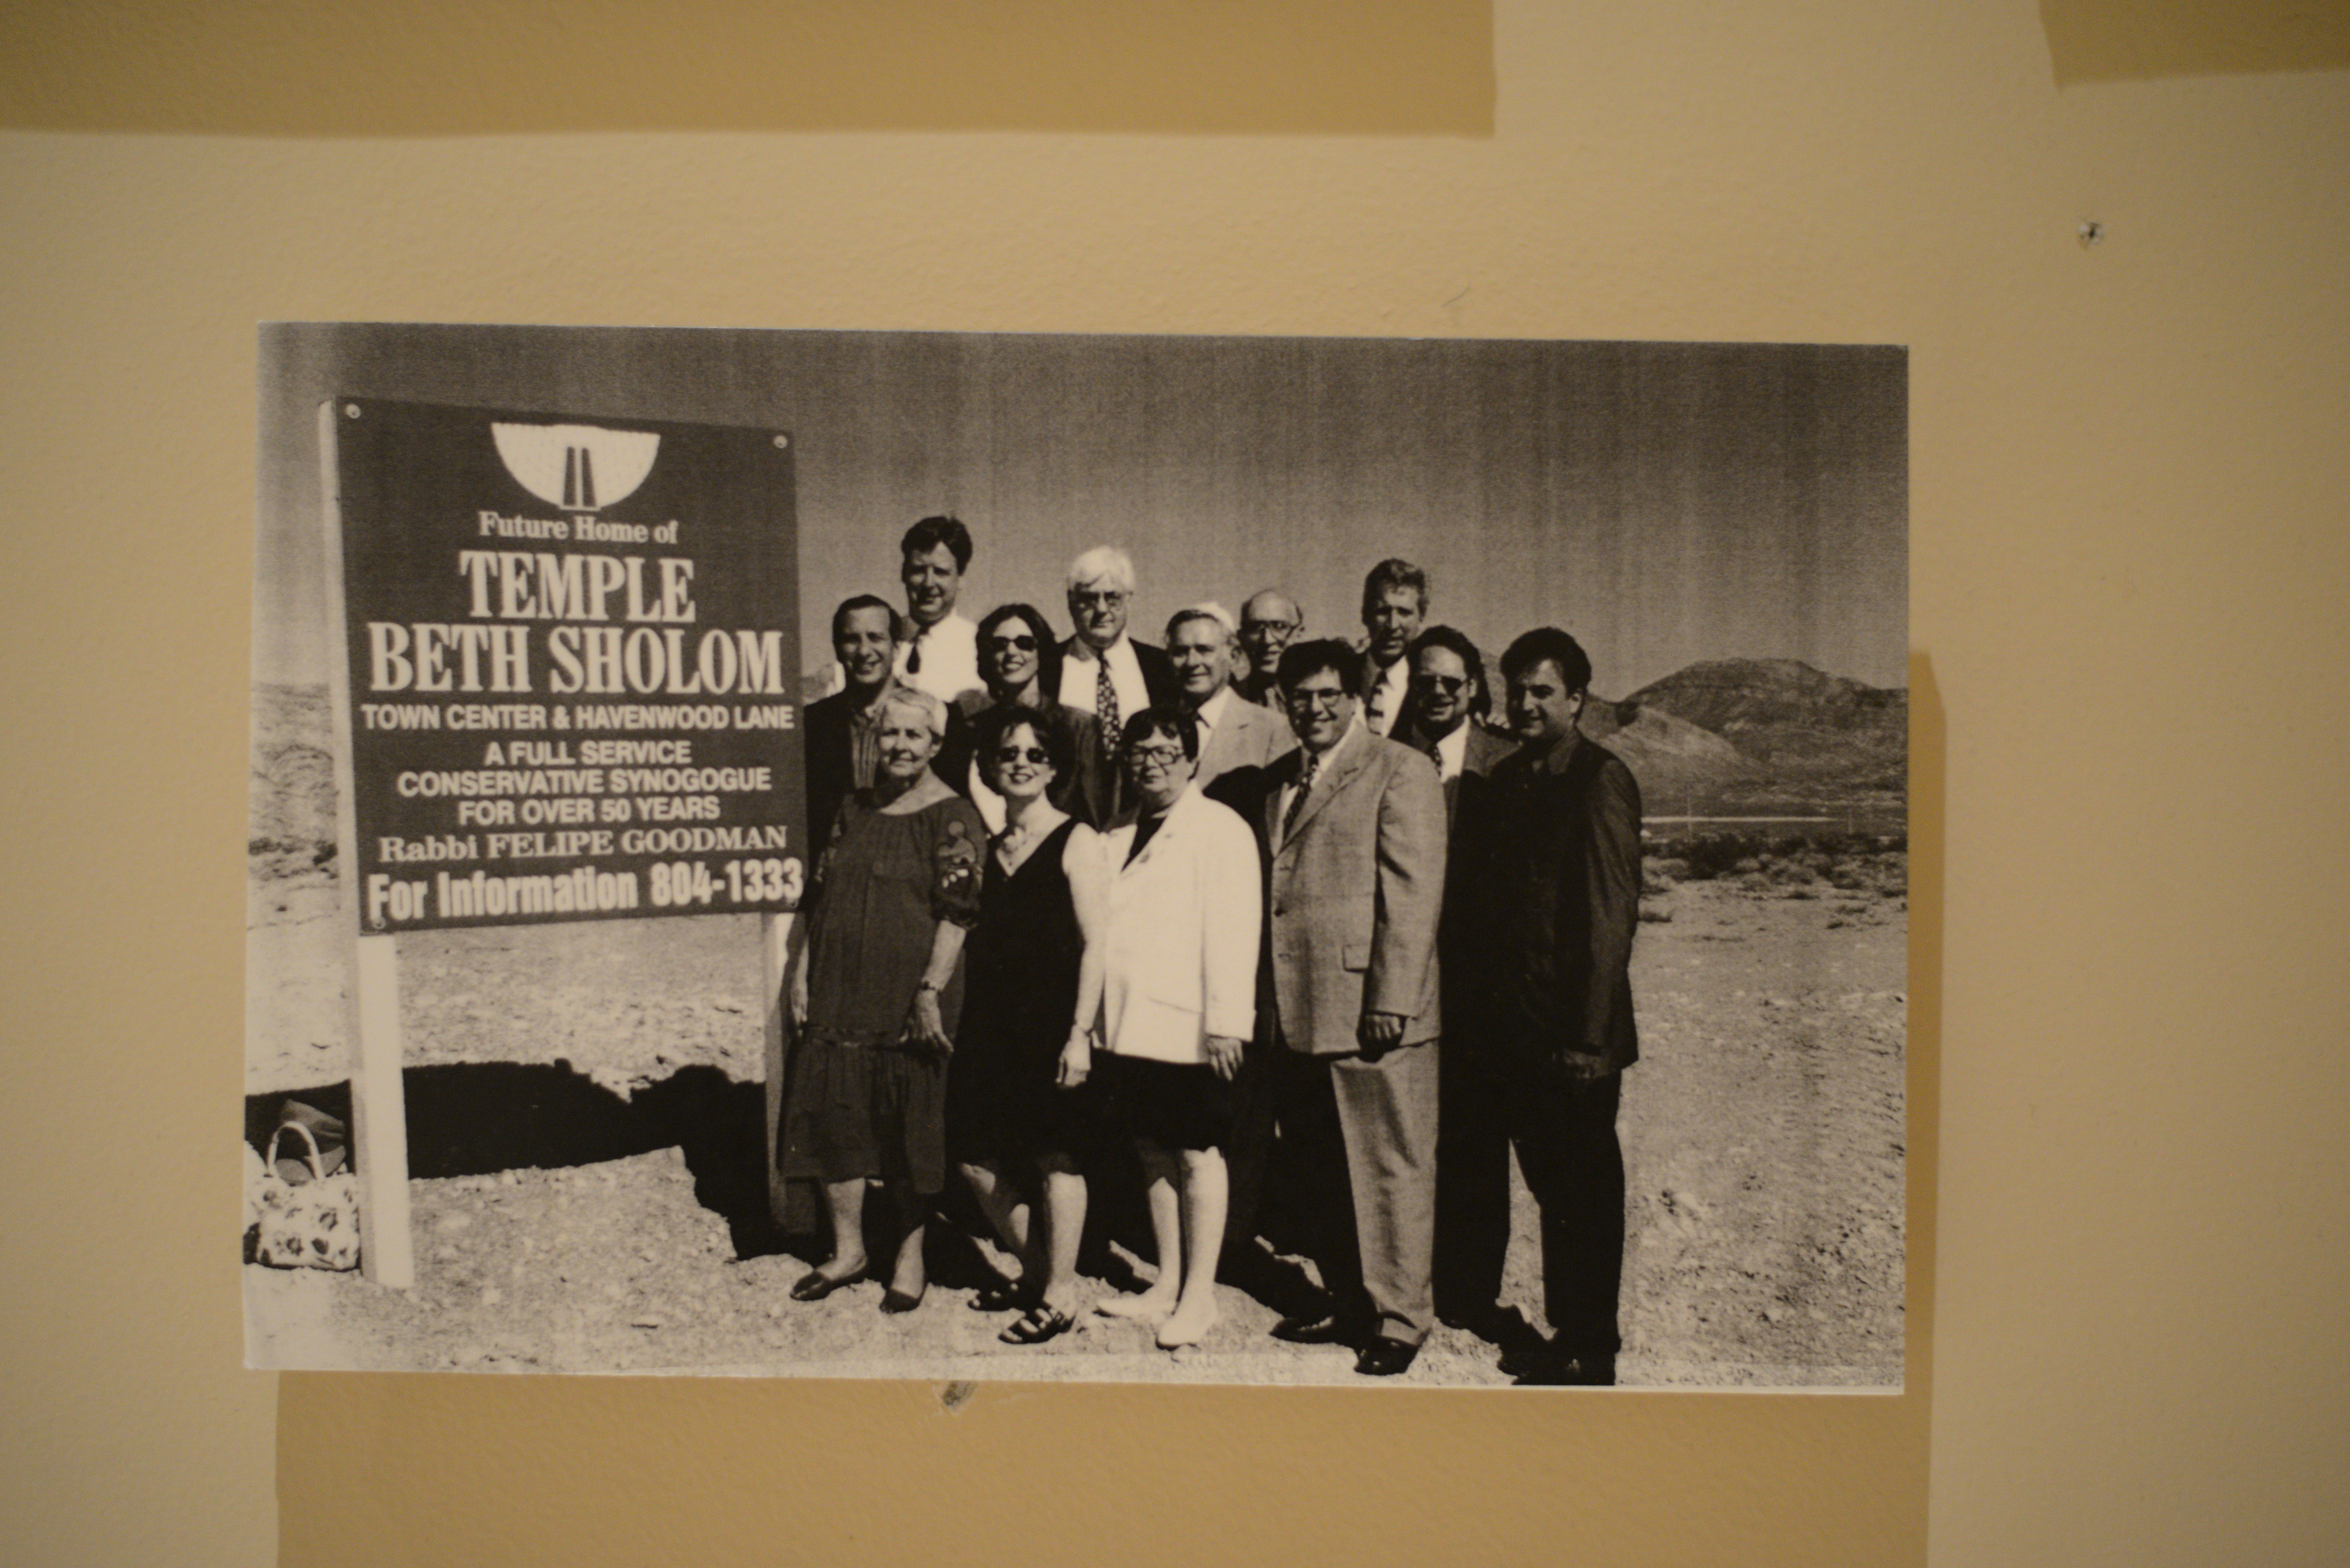 Photograph of a group at site of future home of Temple Beth Sholom, date unknown